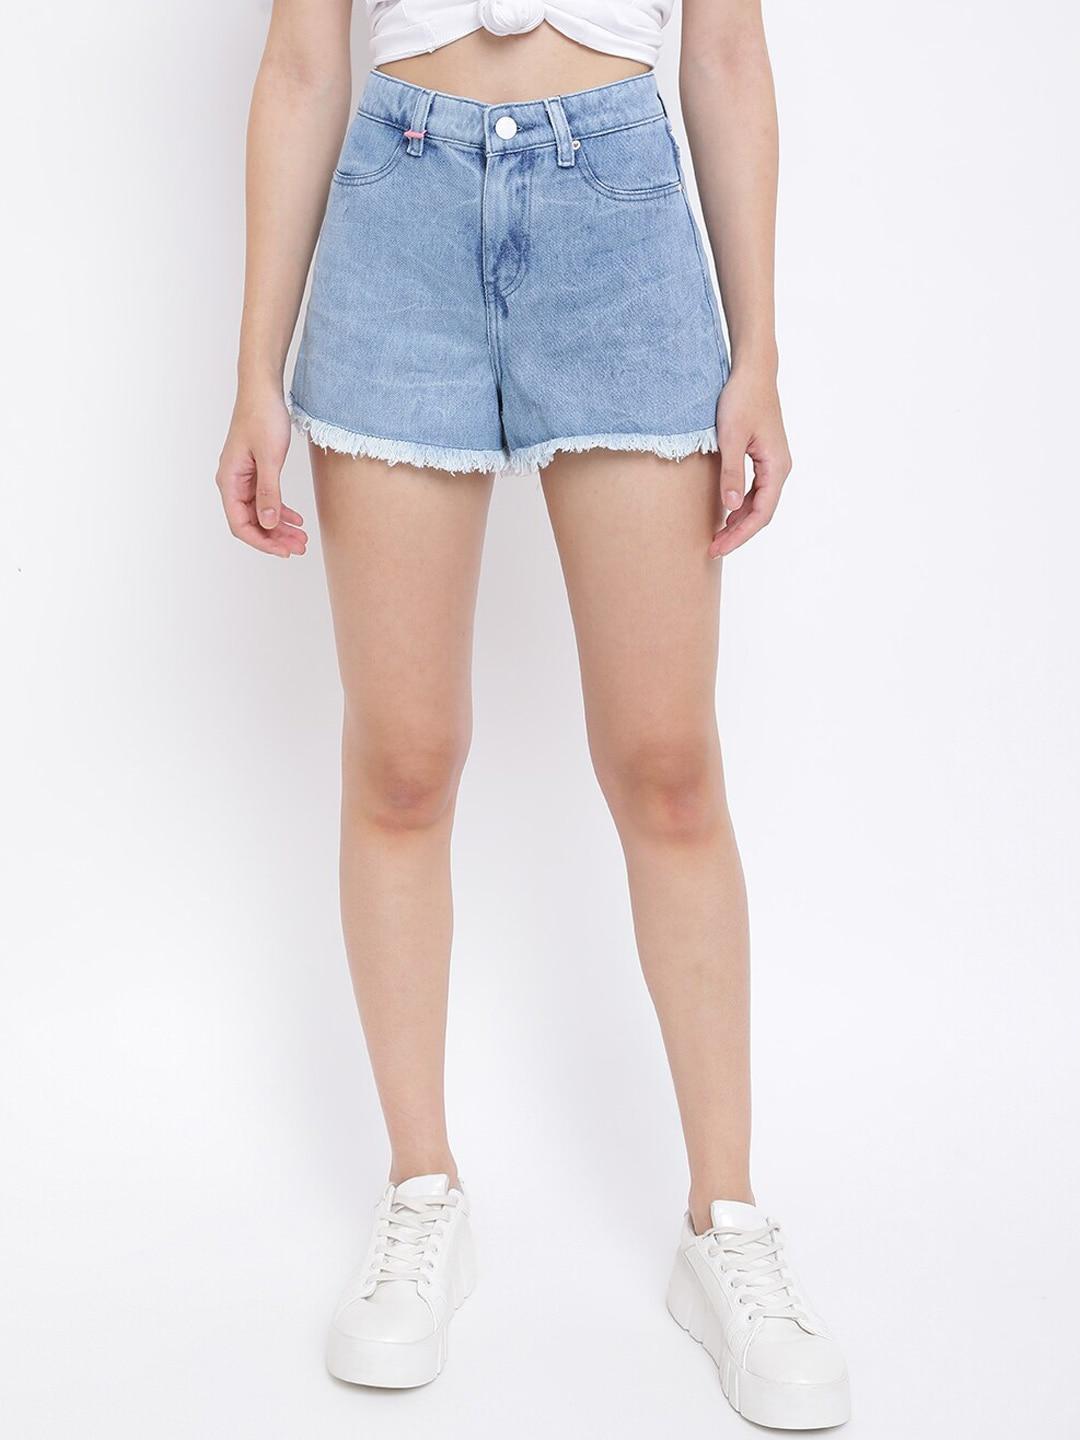 tales-&-stories-women-washed-outdoor-denim-shorts